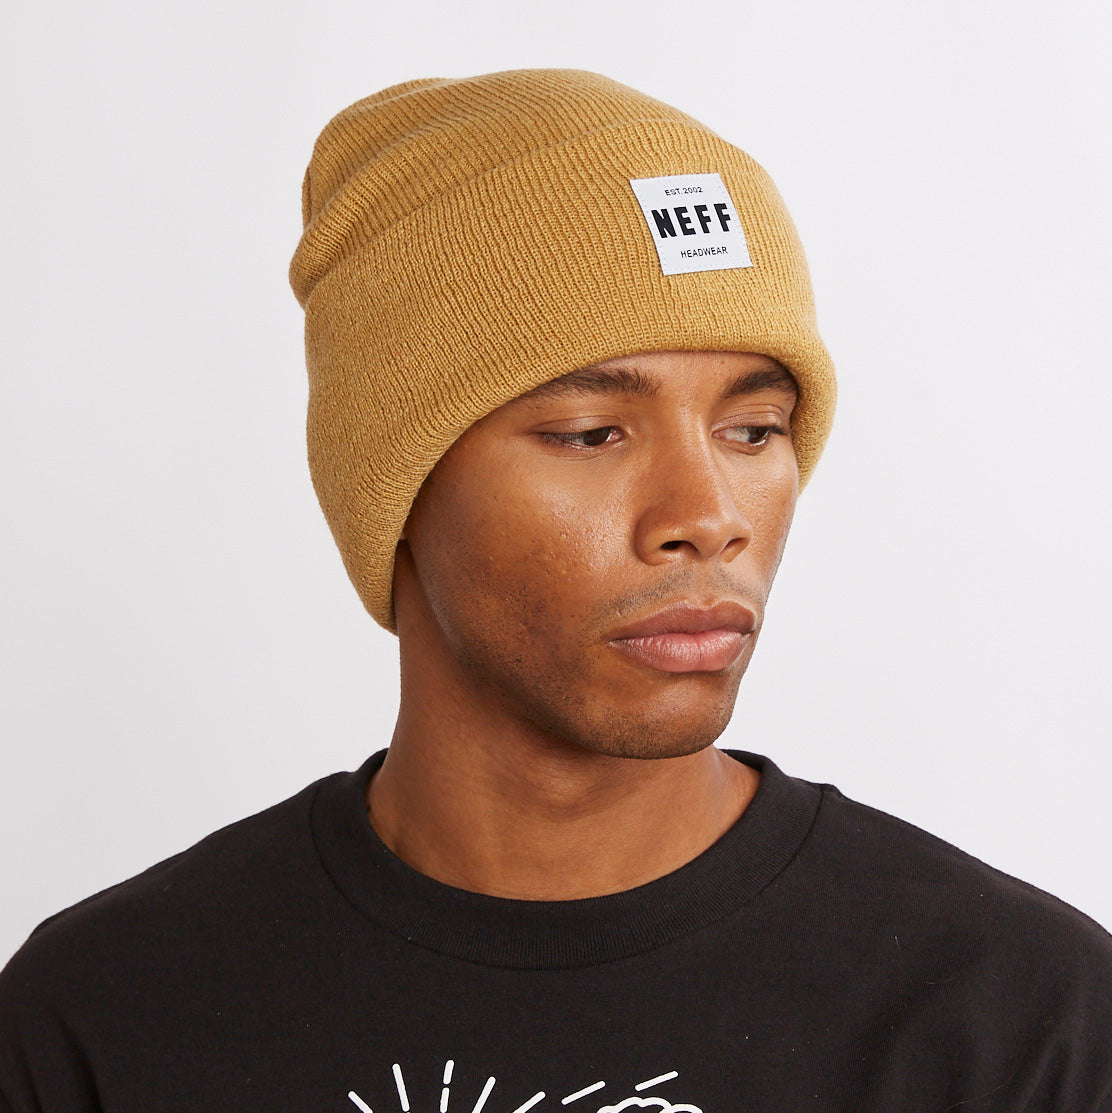 LAWRENCE BEANIE - LIGHT BROWN